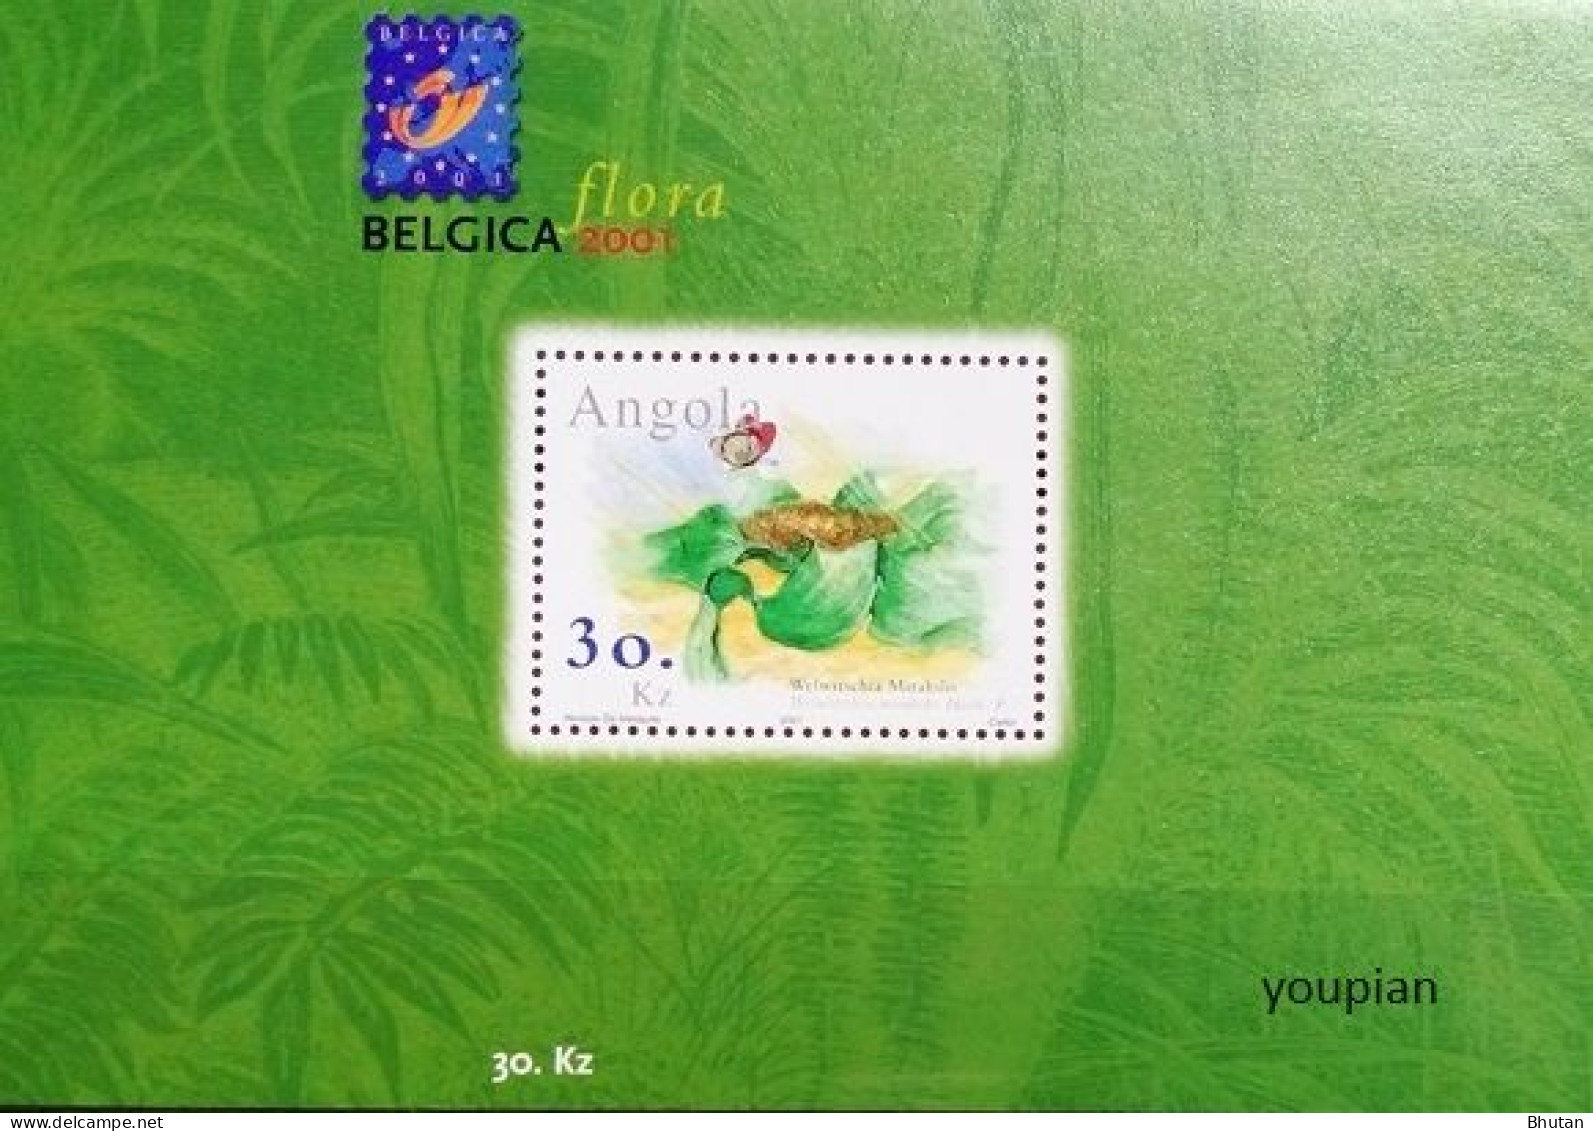 Angola 2001, International Stamps Exhibition BELGICA - Flowers, MNH S/S - Angola